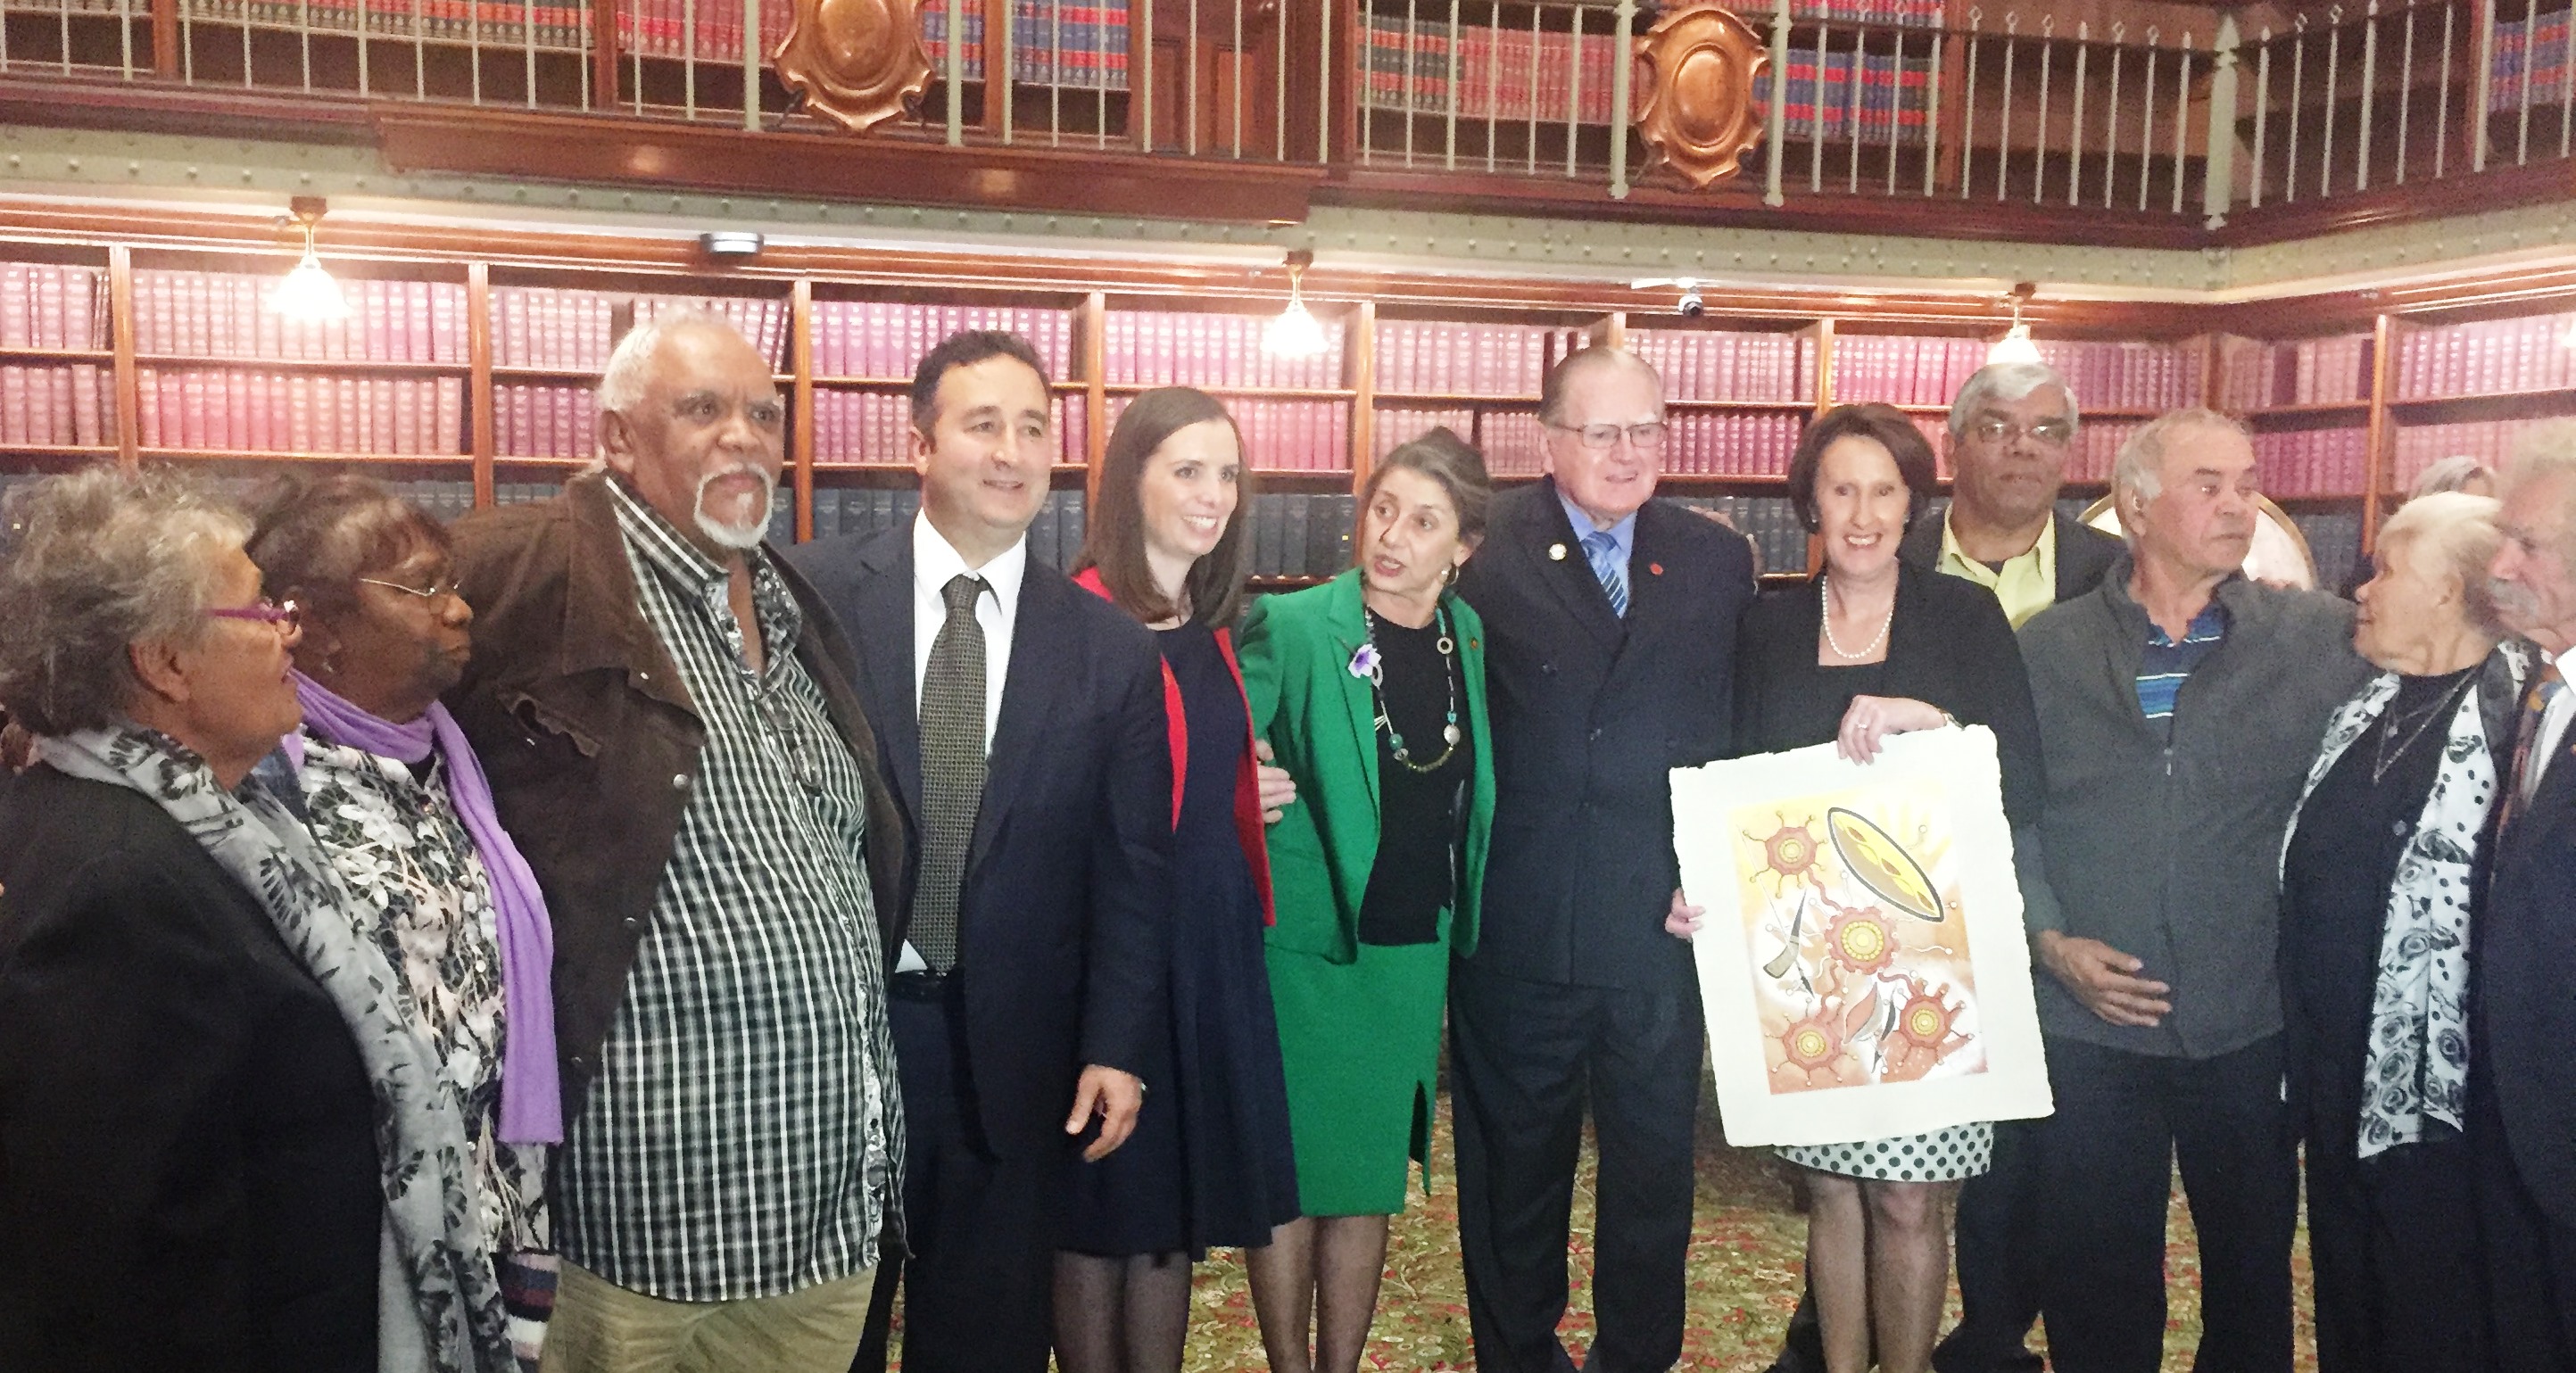 NSW Stolen Generations recommendations welcomed